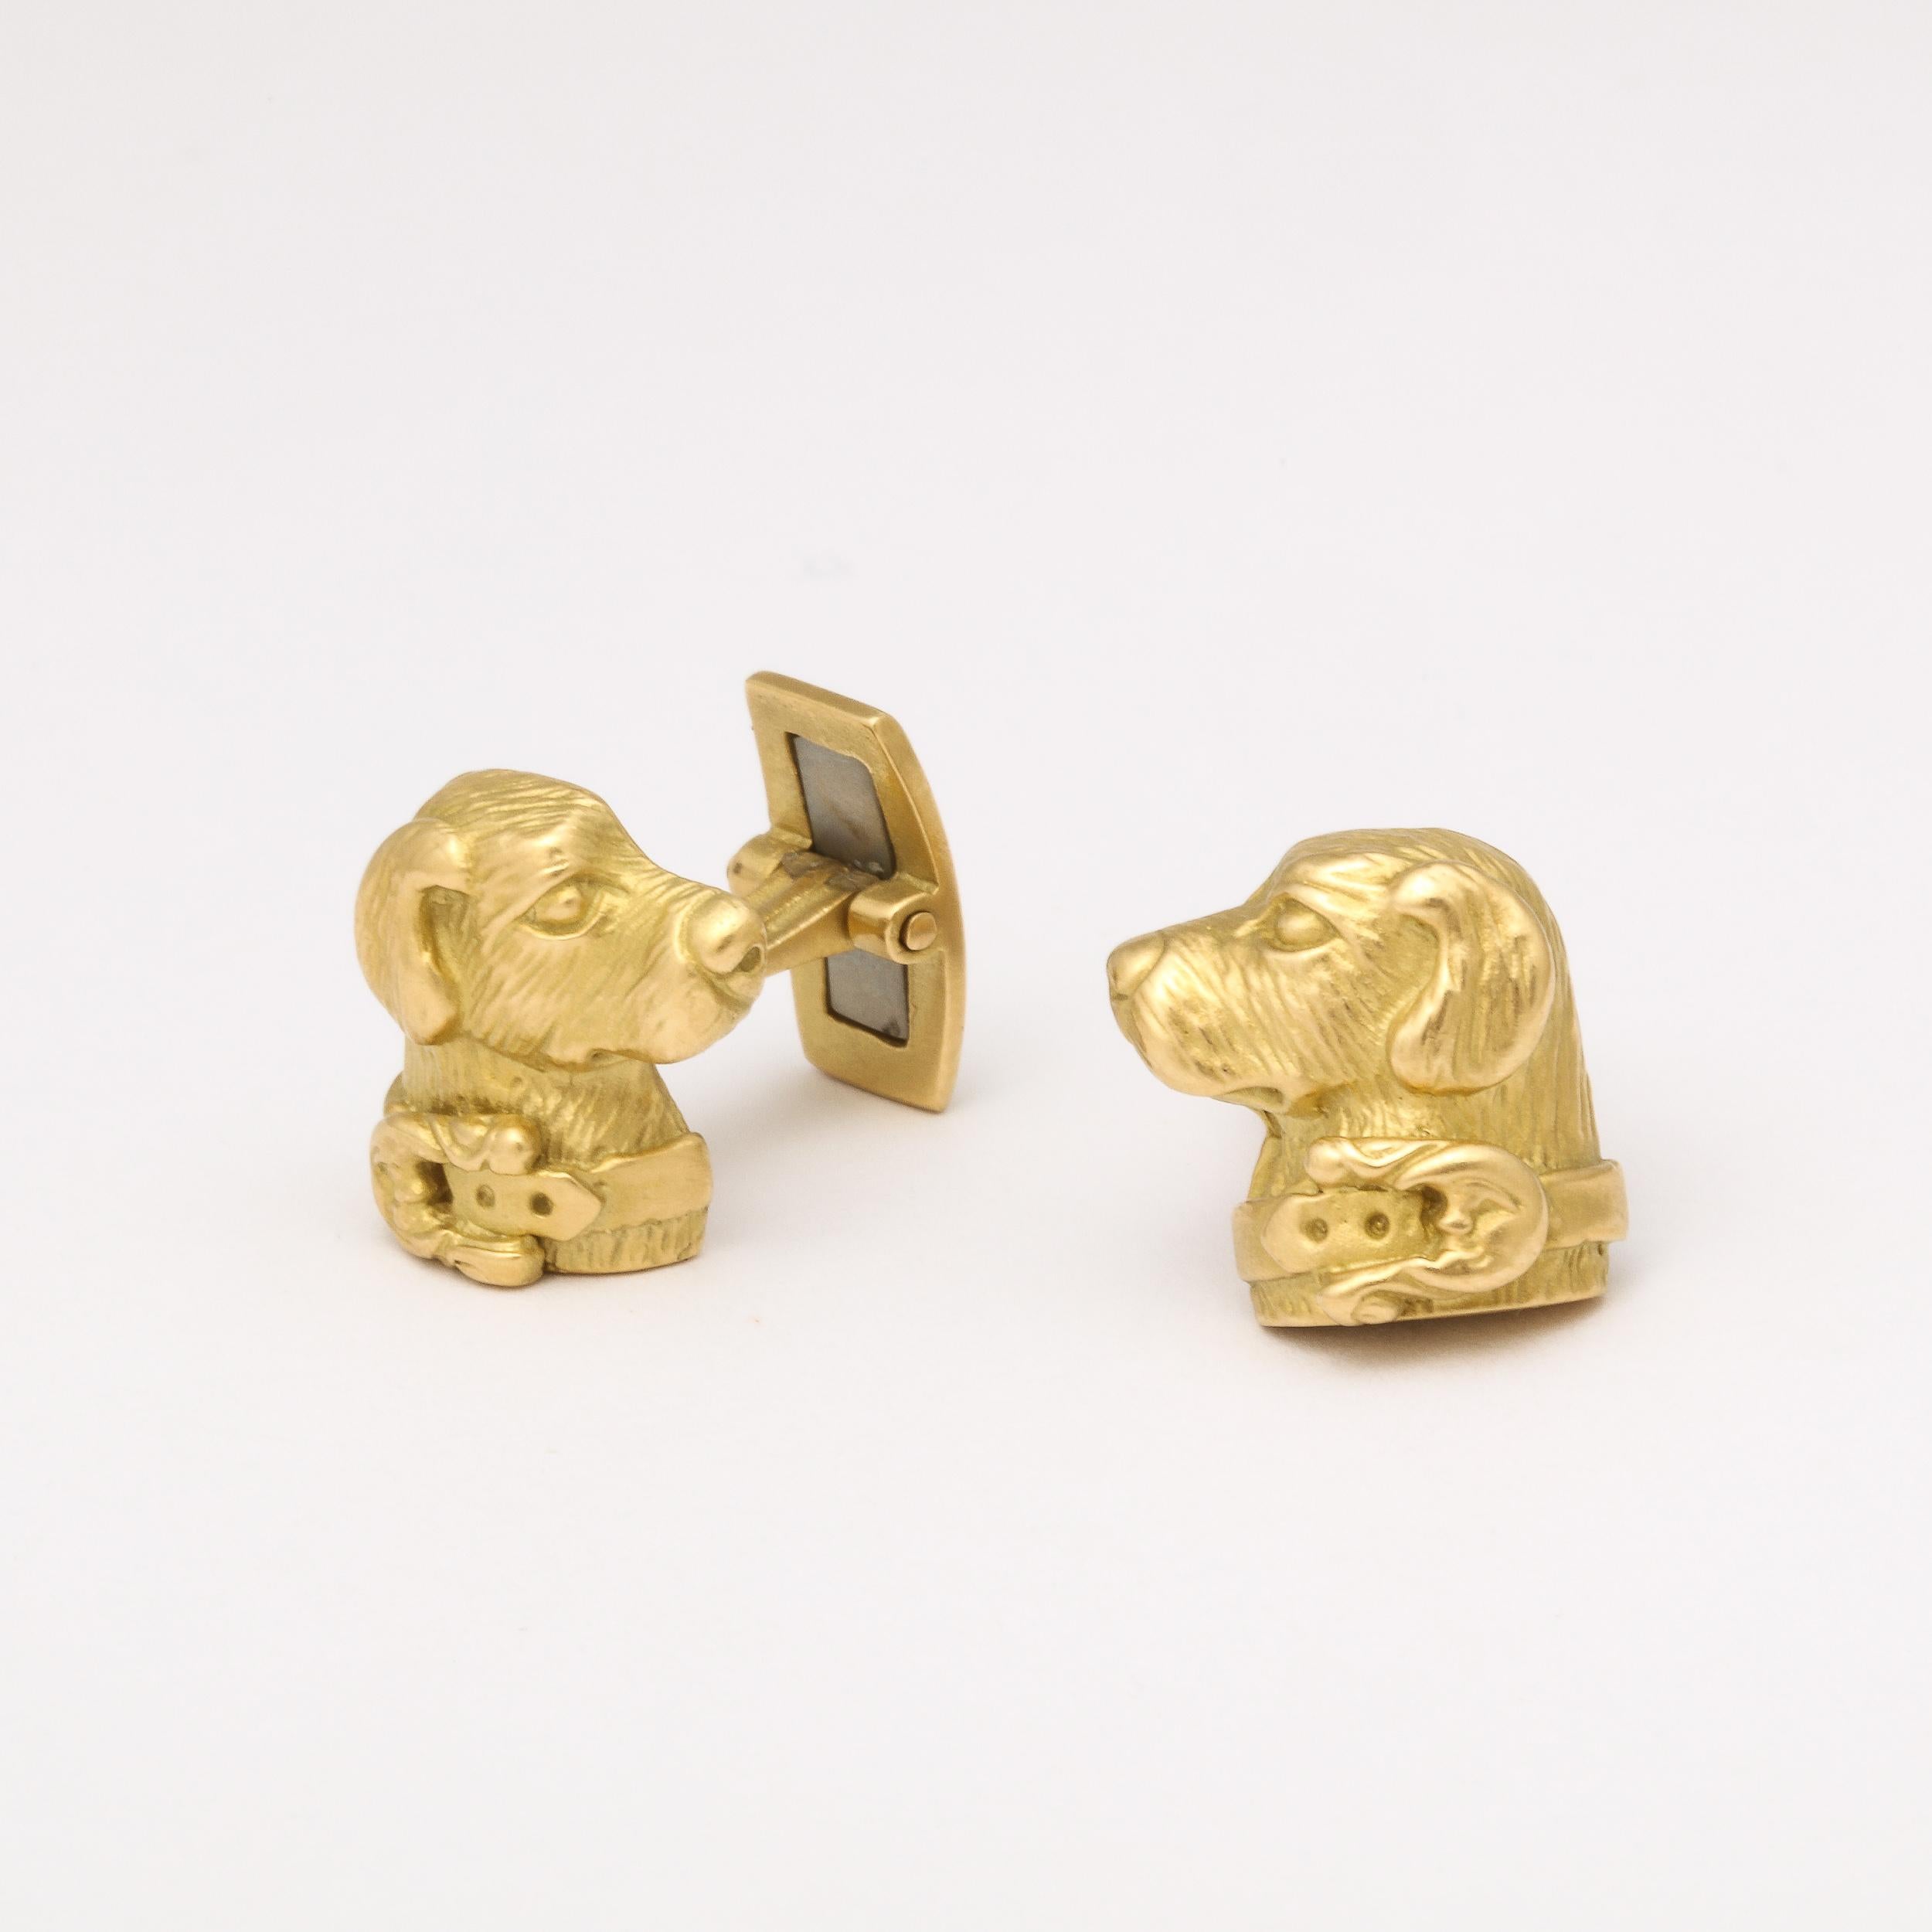 Modernist Cufflinks with Golden Retriever Canine Motif in 14 Carat Yellow Gold For Sale 4